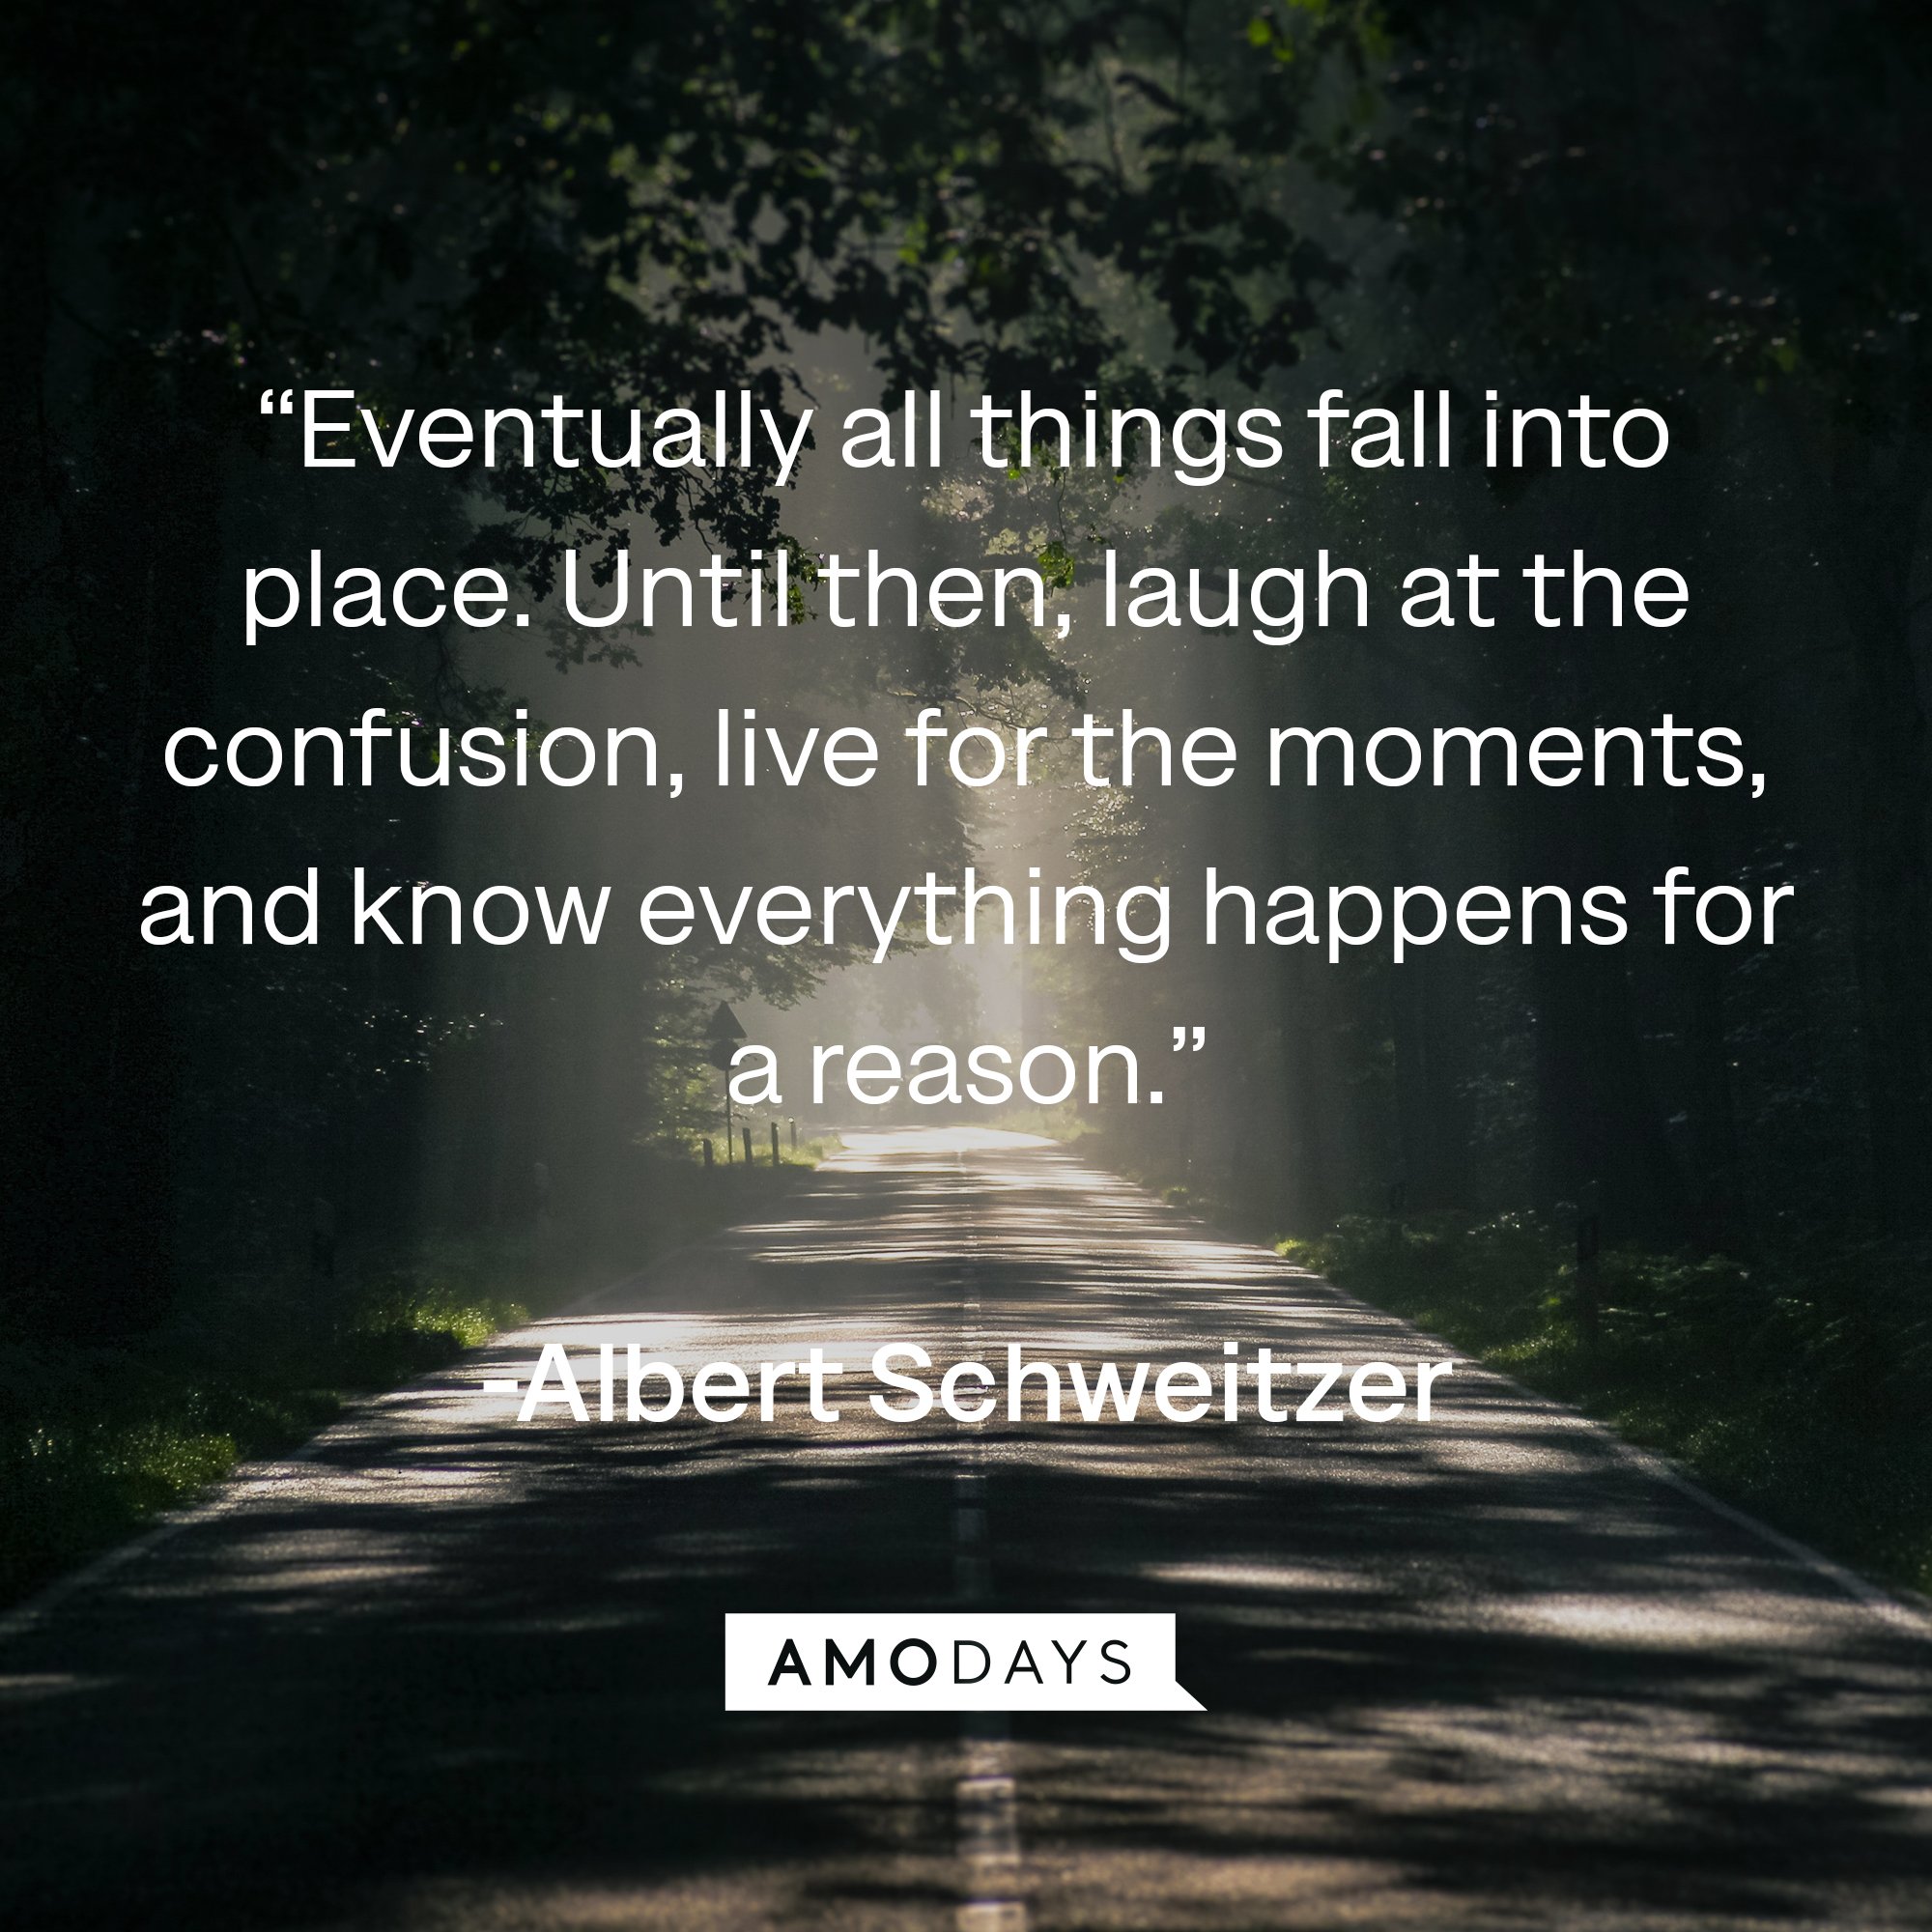 Albert Schweitzer's quote: “Eventually all things fall into place. Until then, laugh at the confusion, live for the moments, and know everything happens for a reason.” | Image: AmoDays